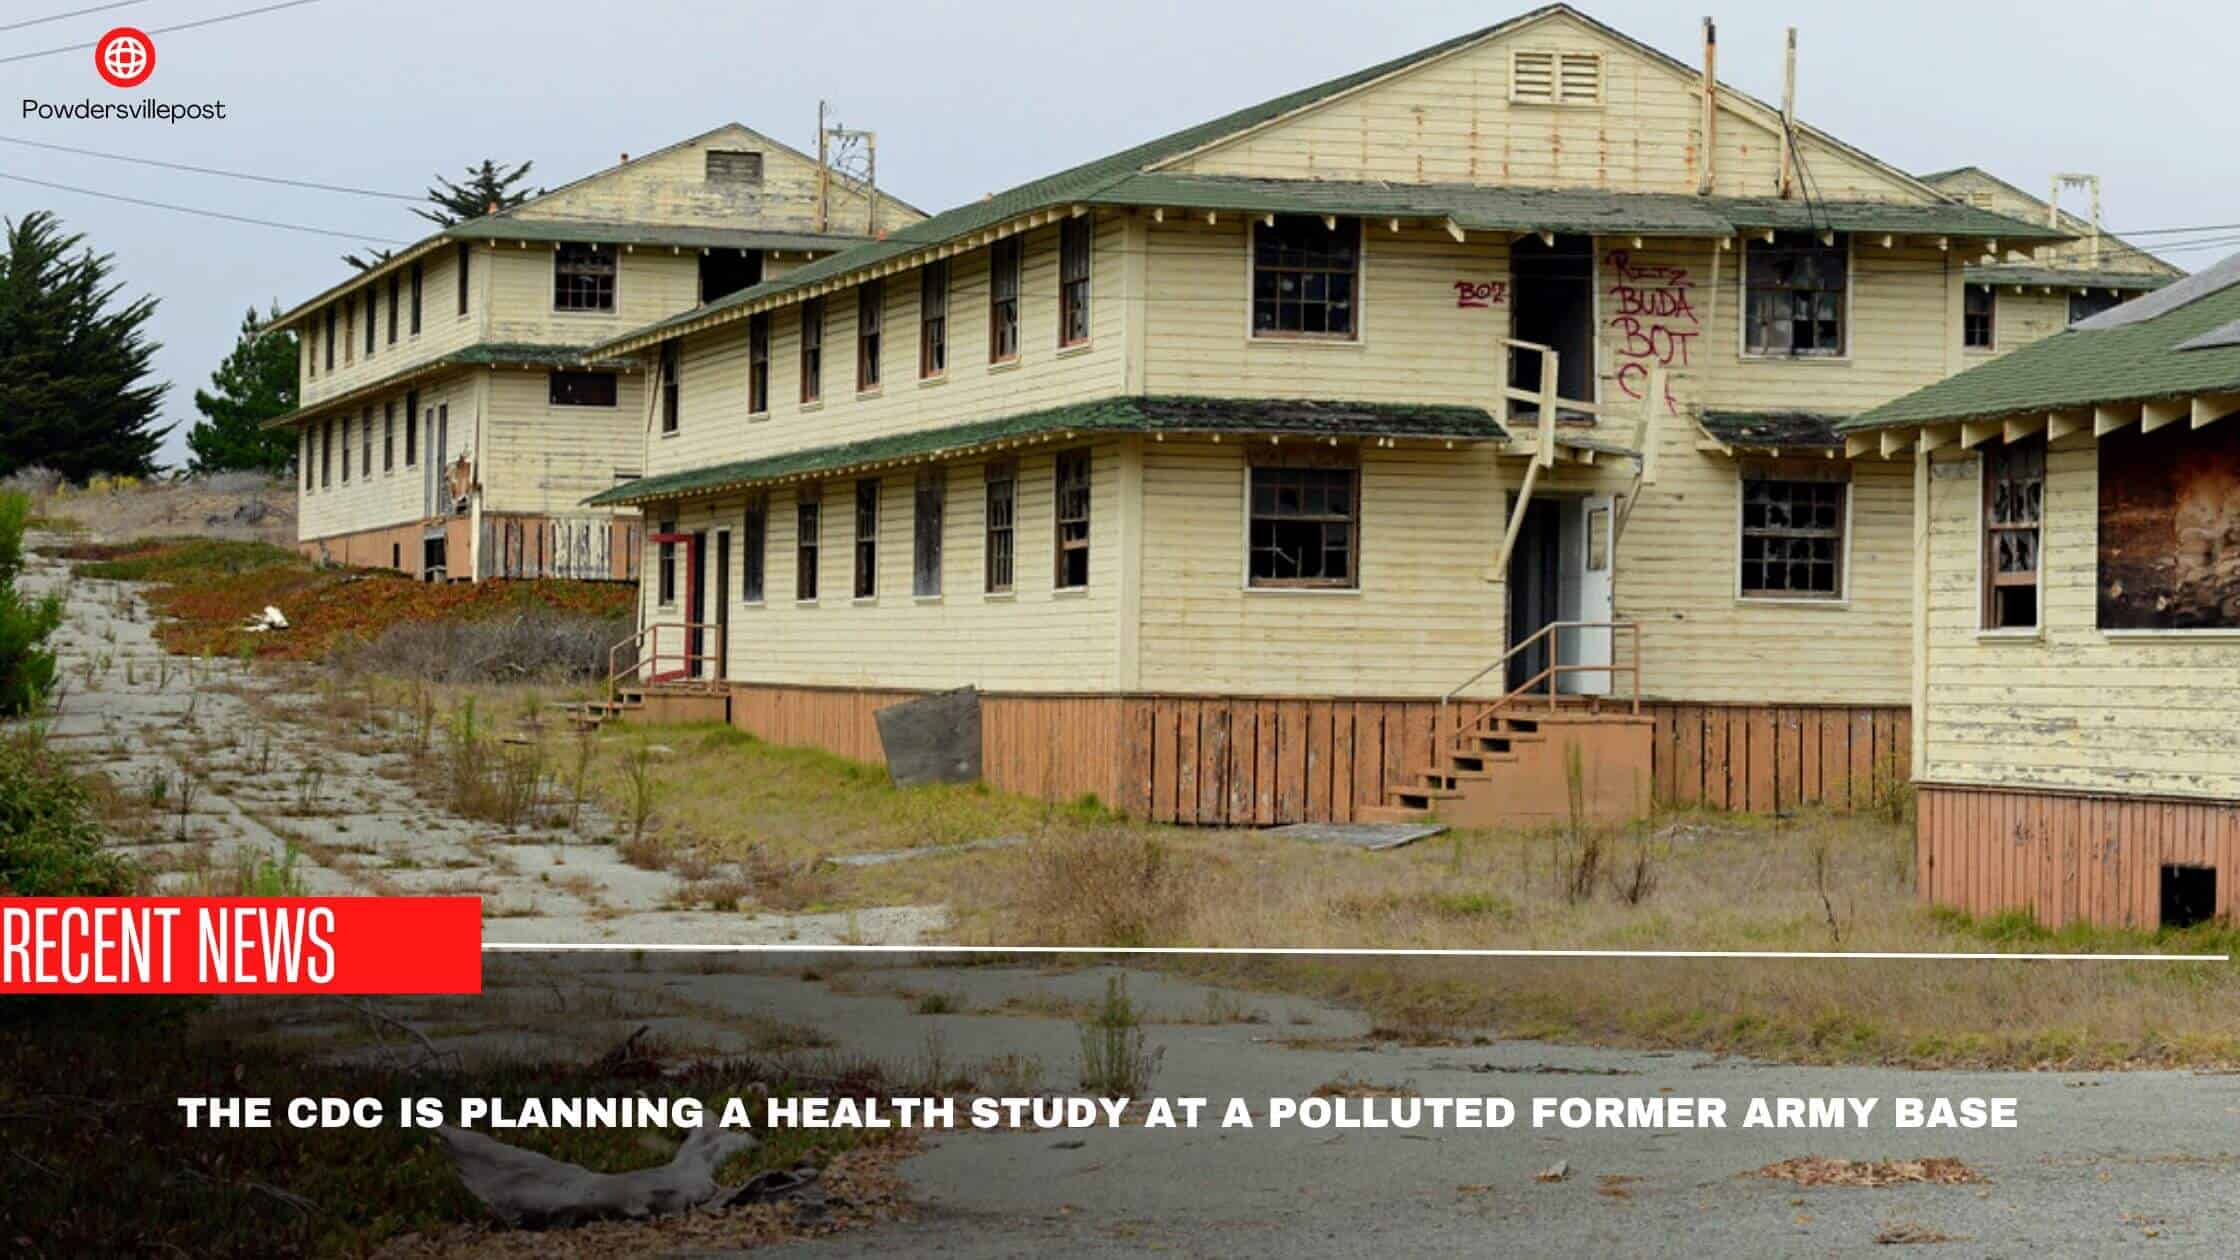 The CDC Is Planning A Health Study At A Polluted Former Army Base